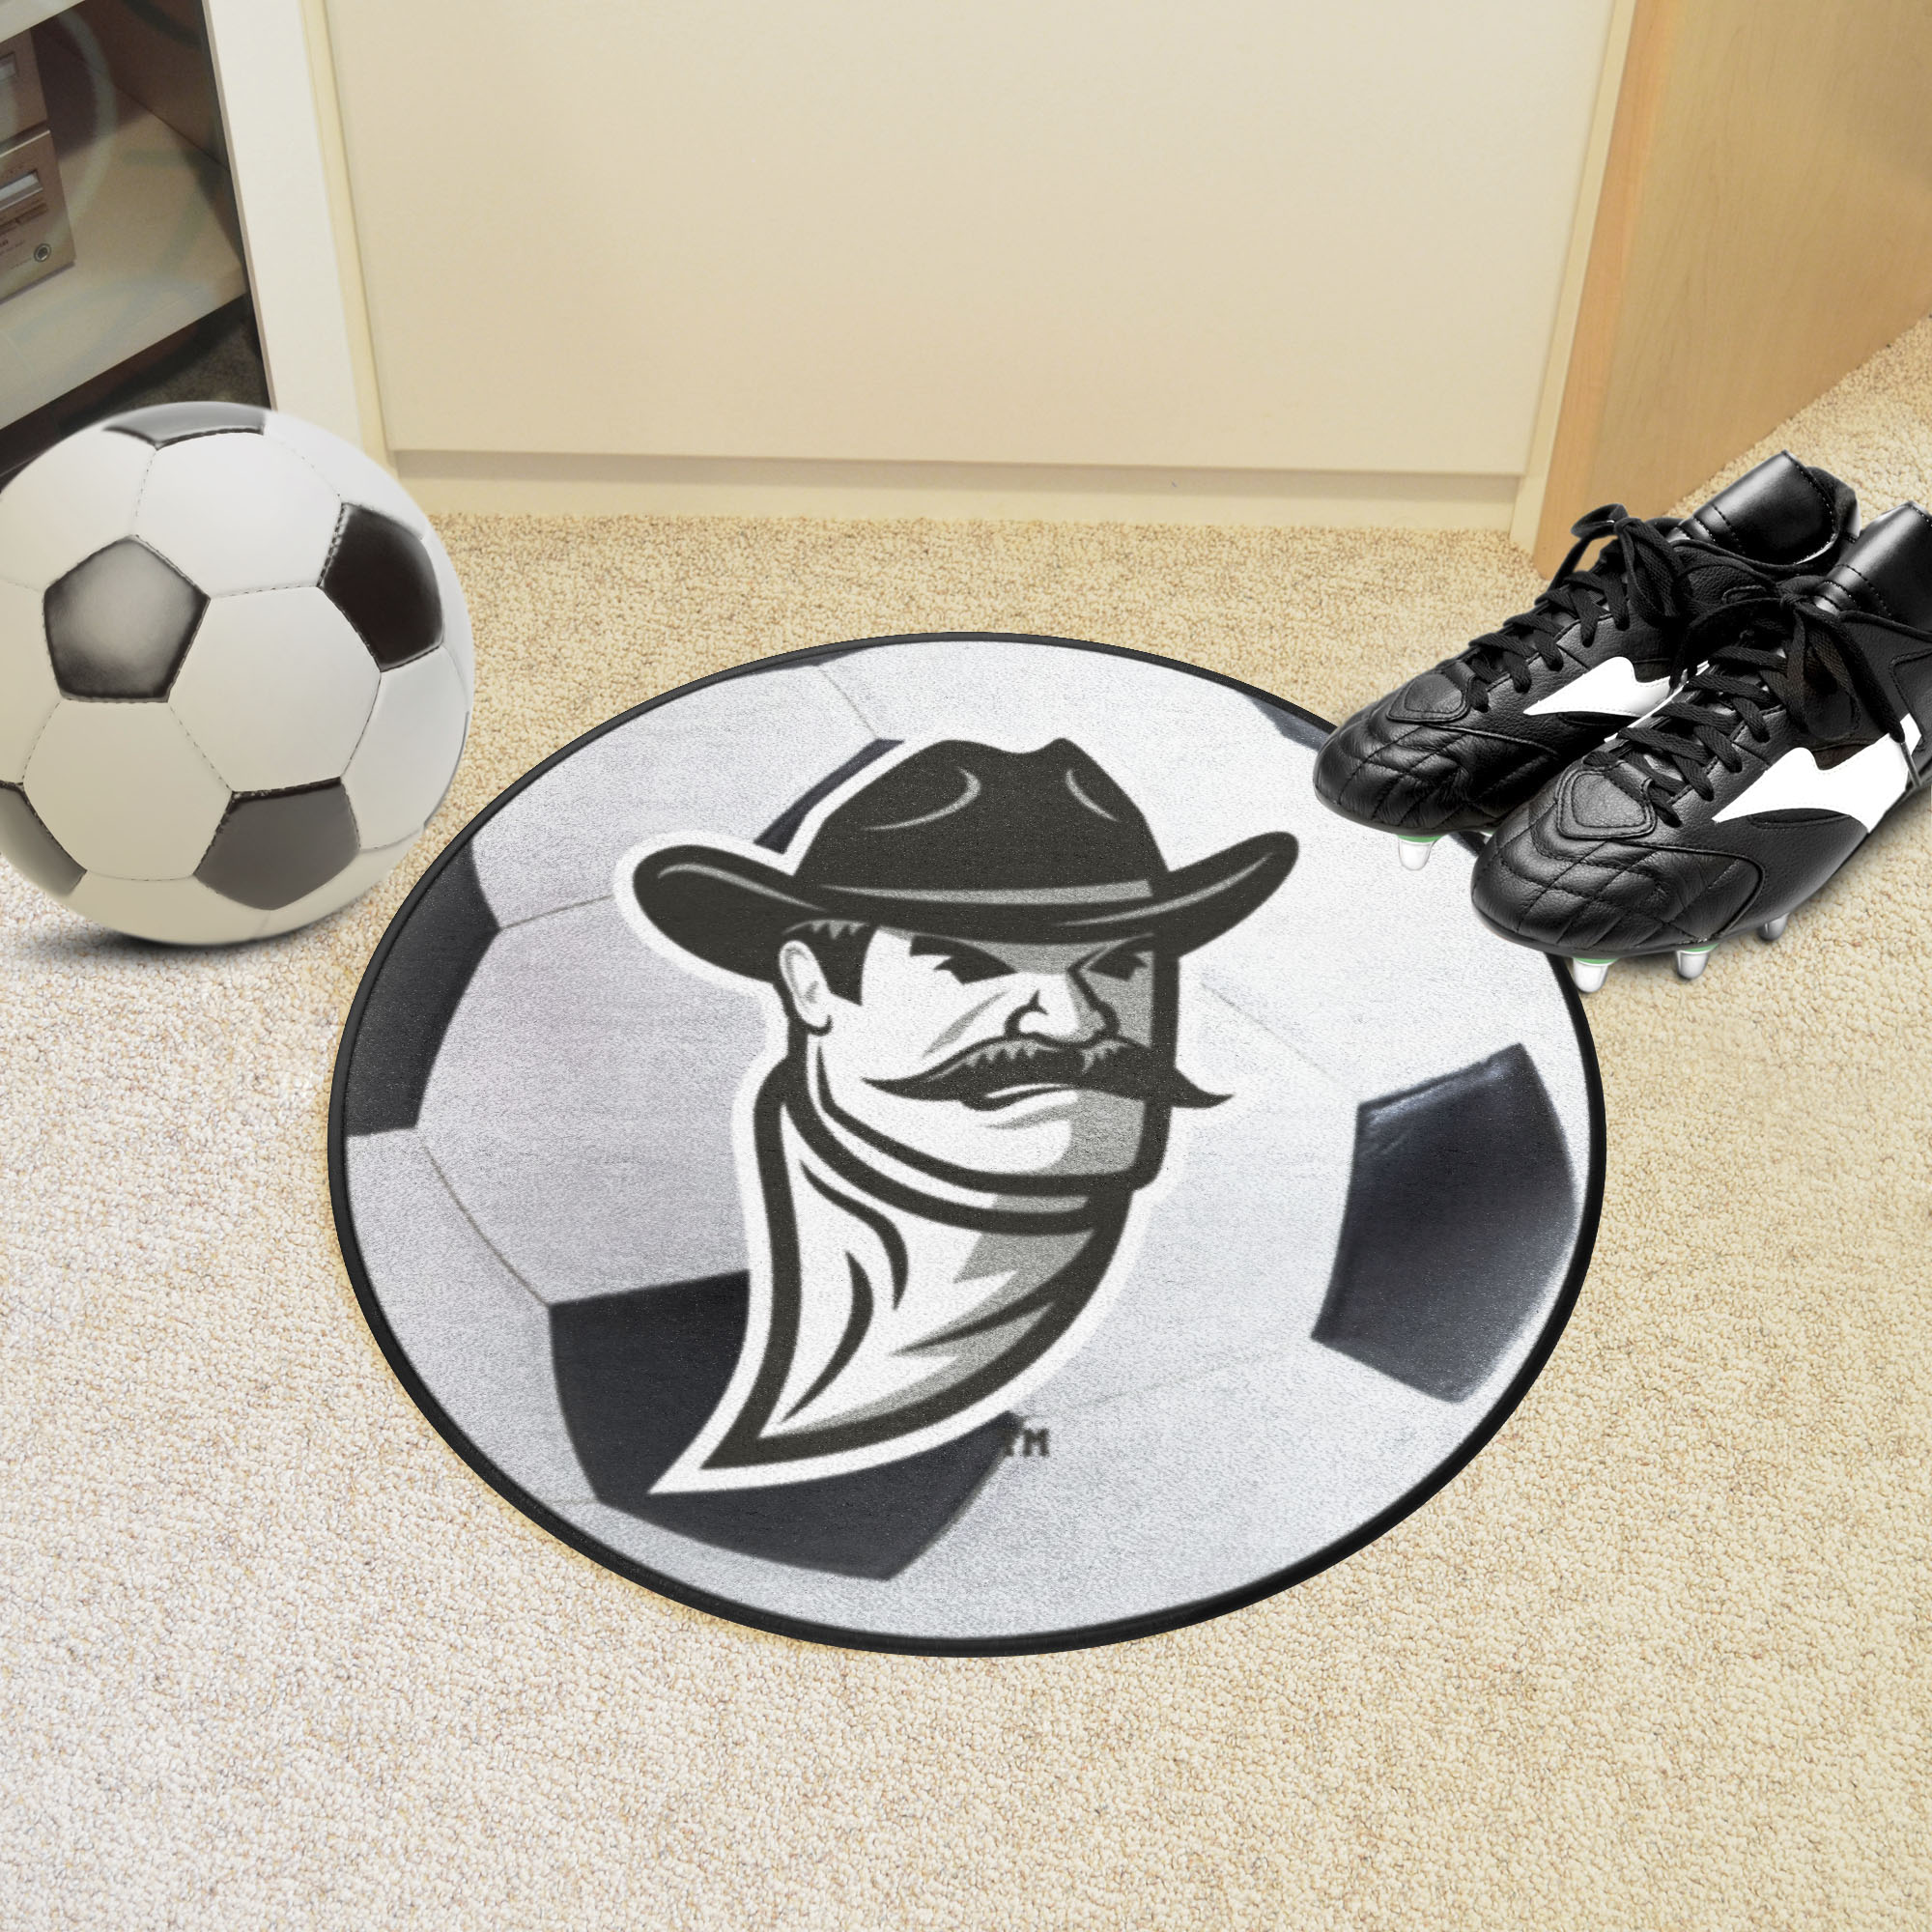 New Mexico State Lobos Soccer Ball Shaped Area Rug